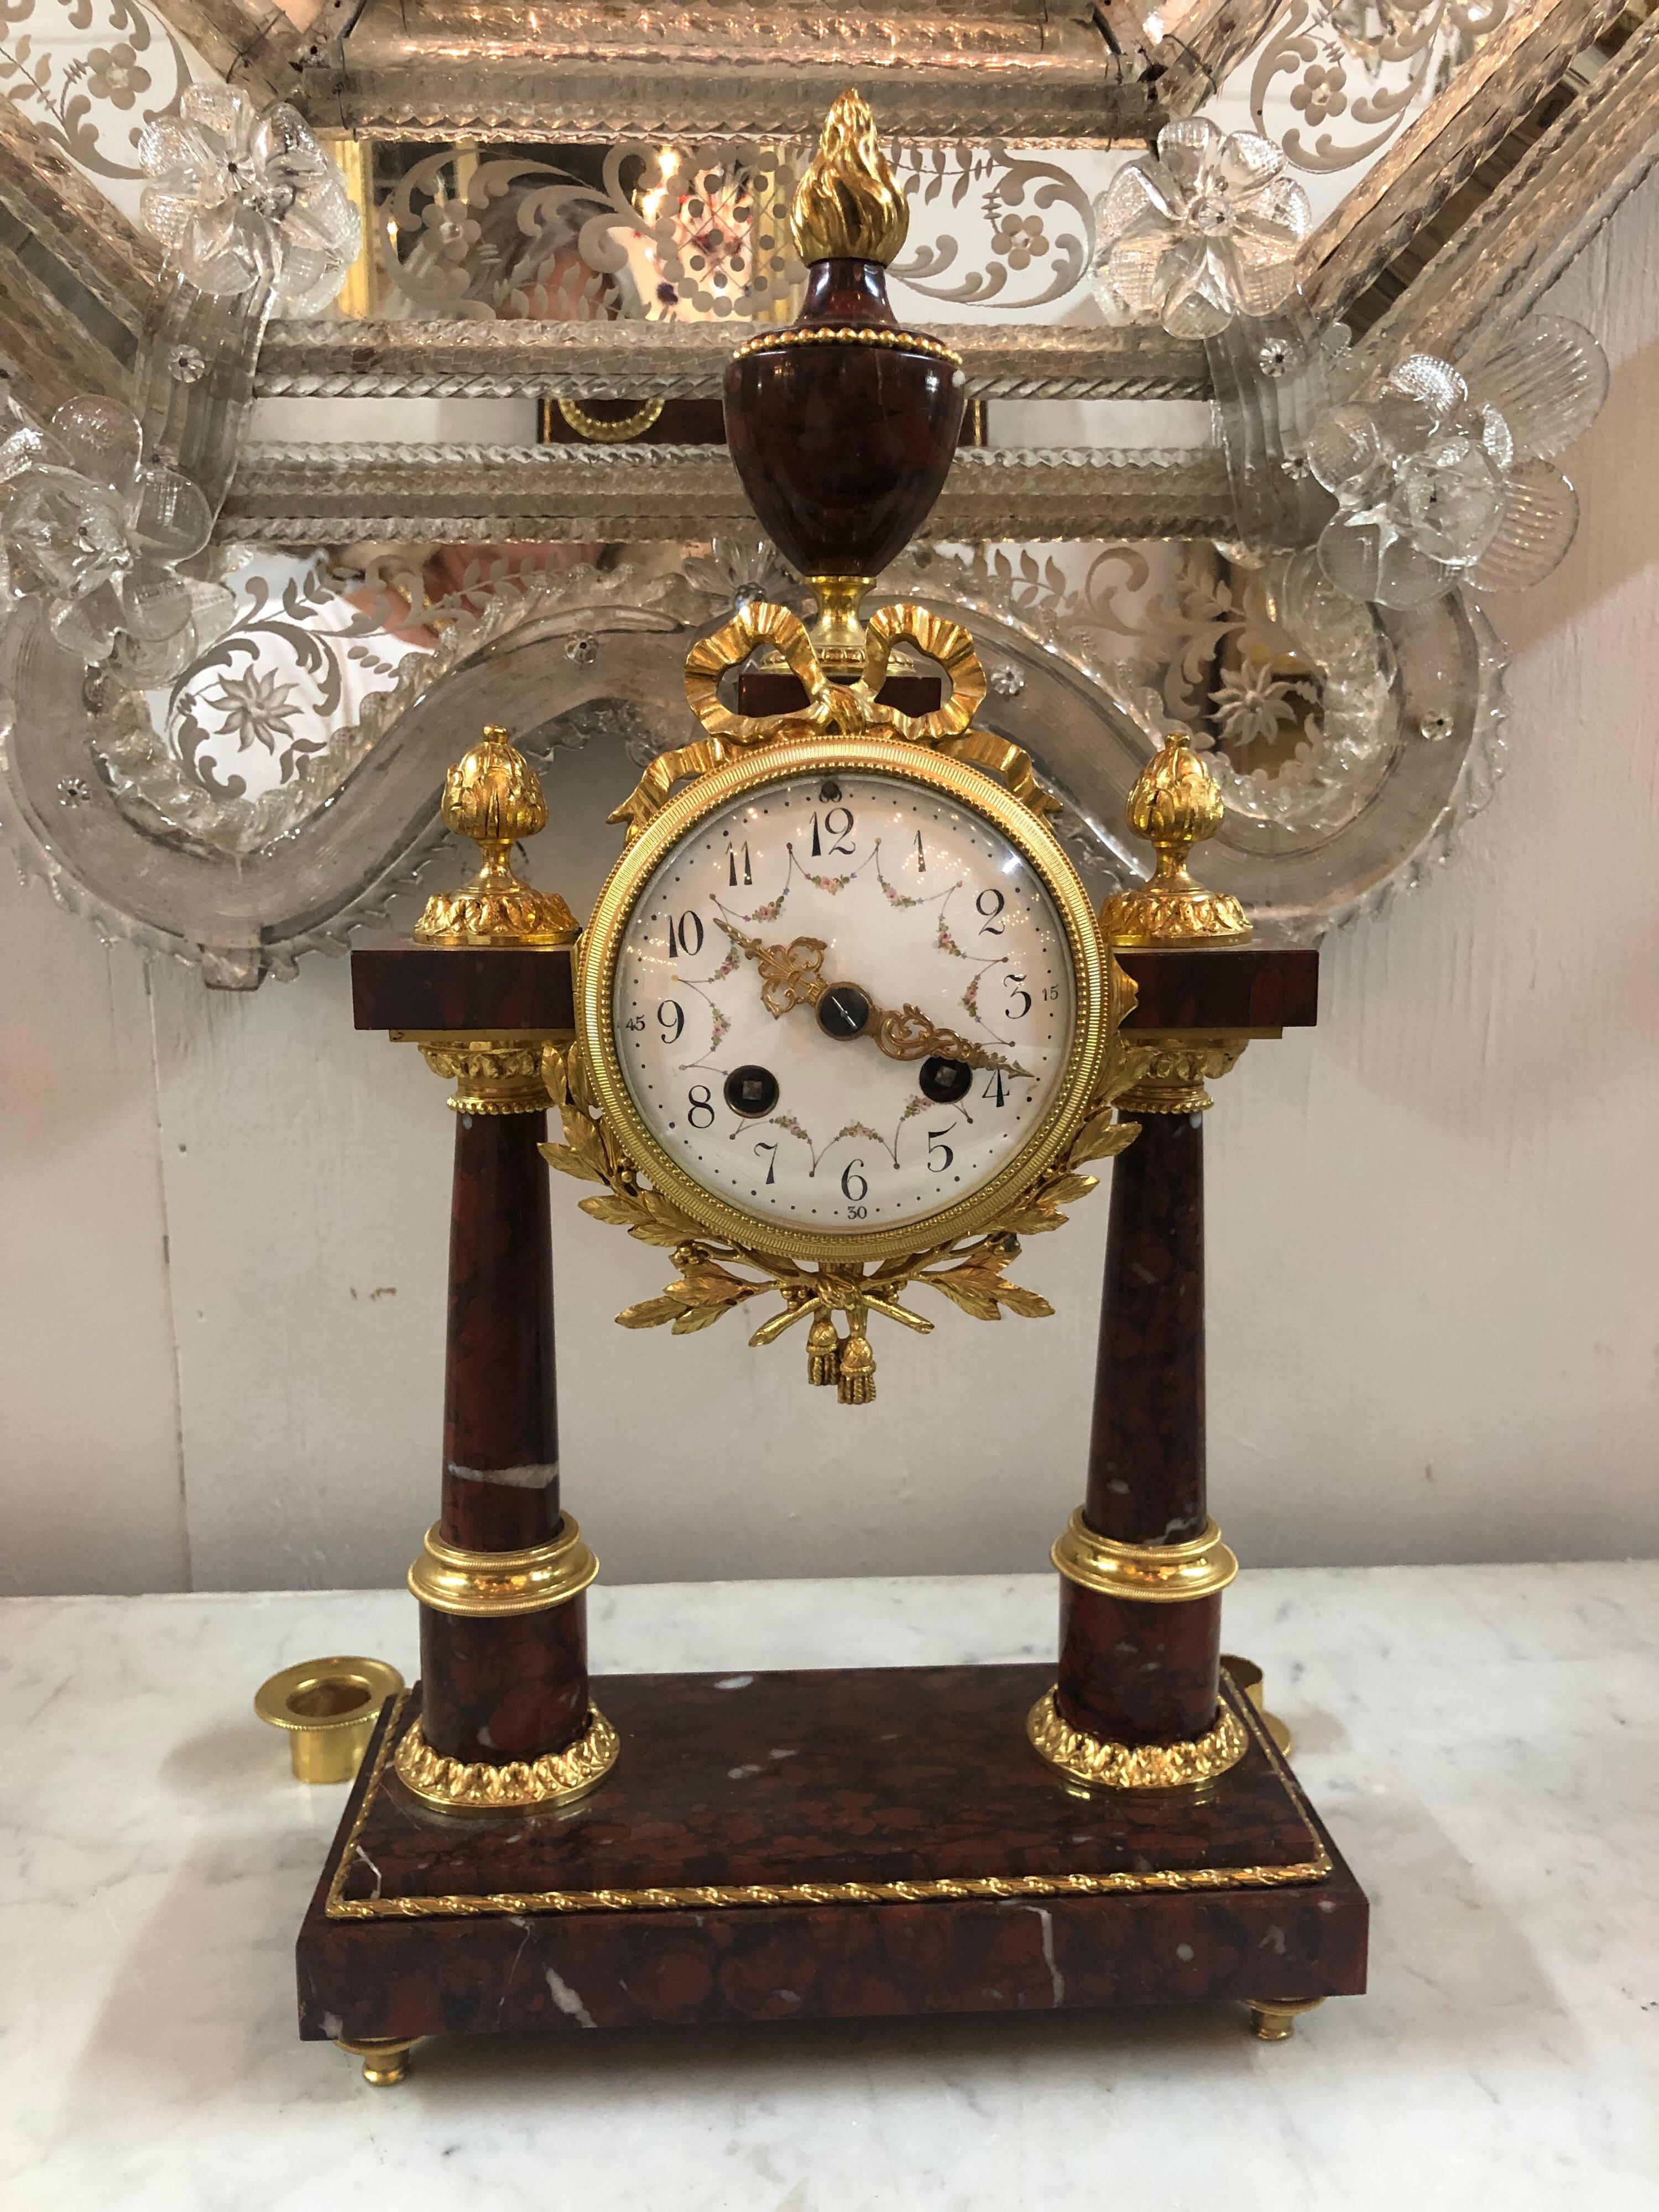 Exceptional 19th century French 3-piece rouge marble and bronze clock set. Very fine quality and detail on these pieces.